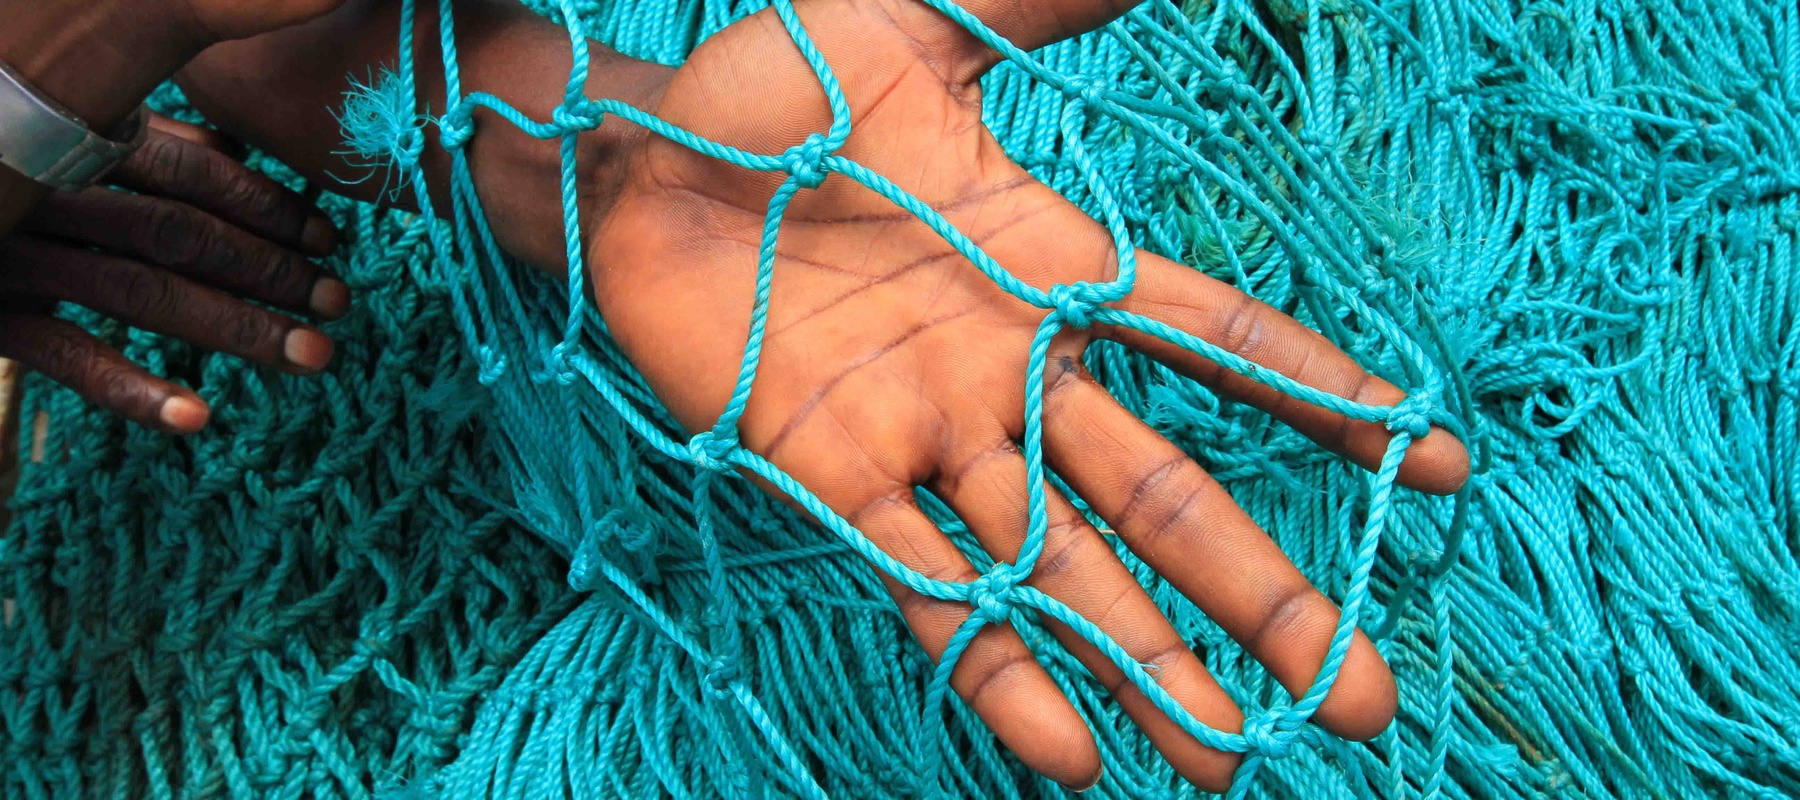 Net and hand